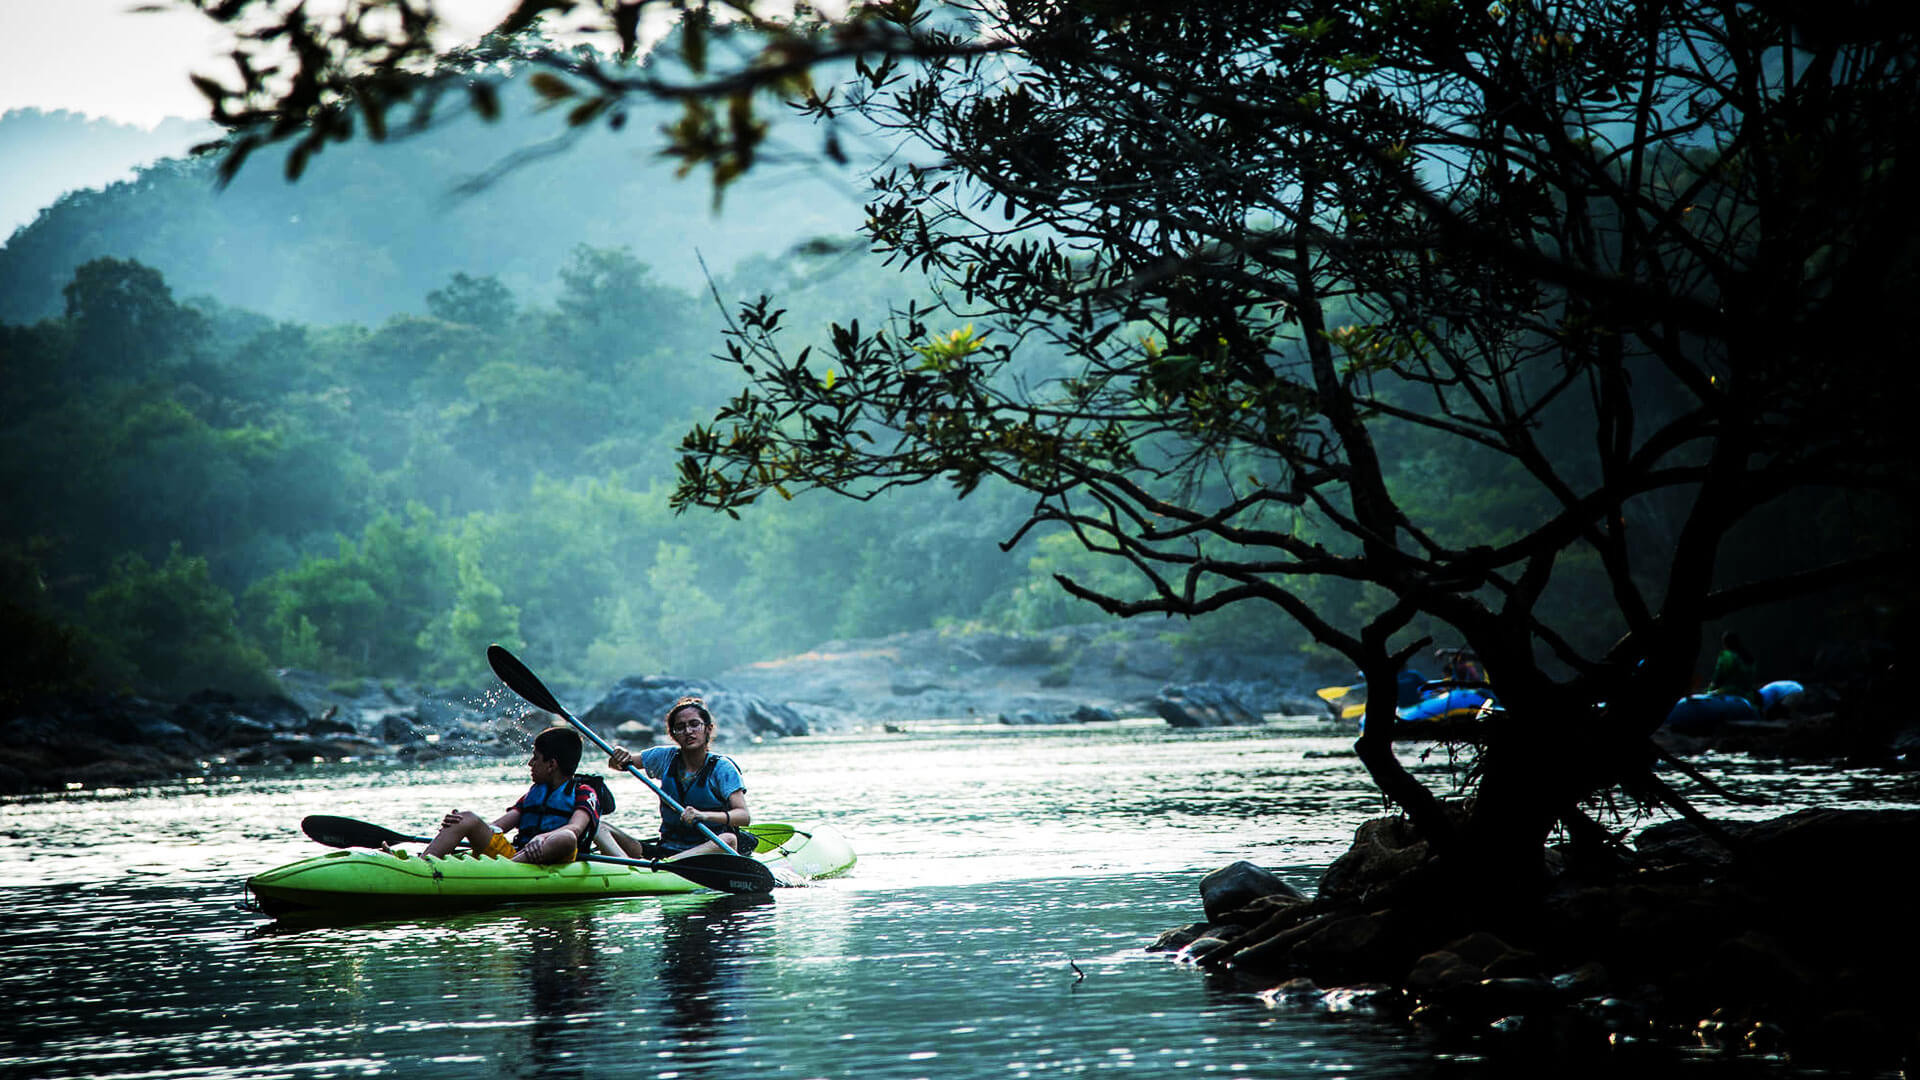 dandeli near by places to visit